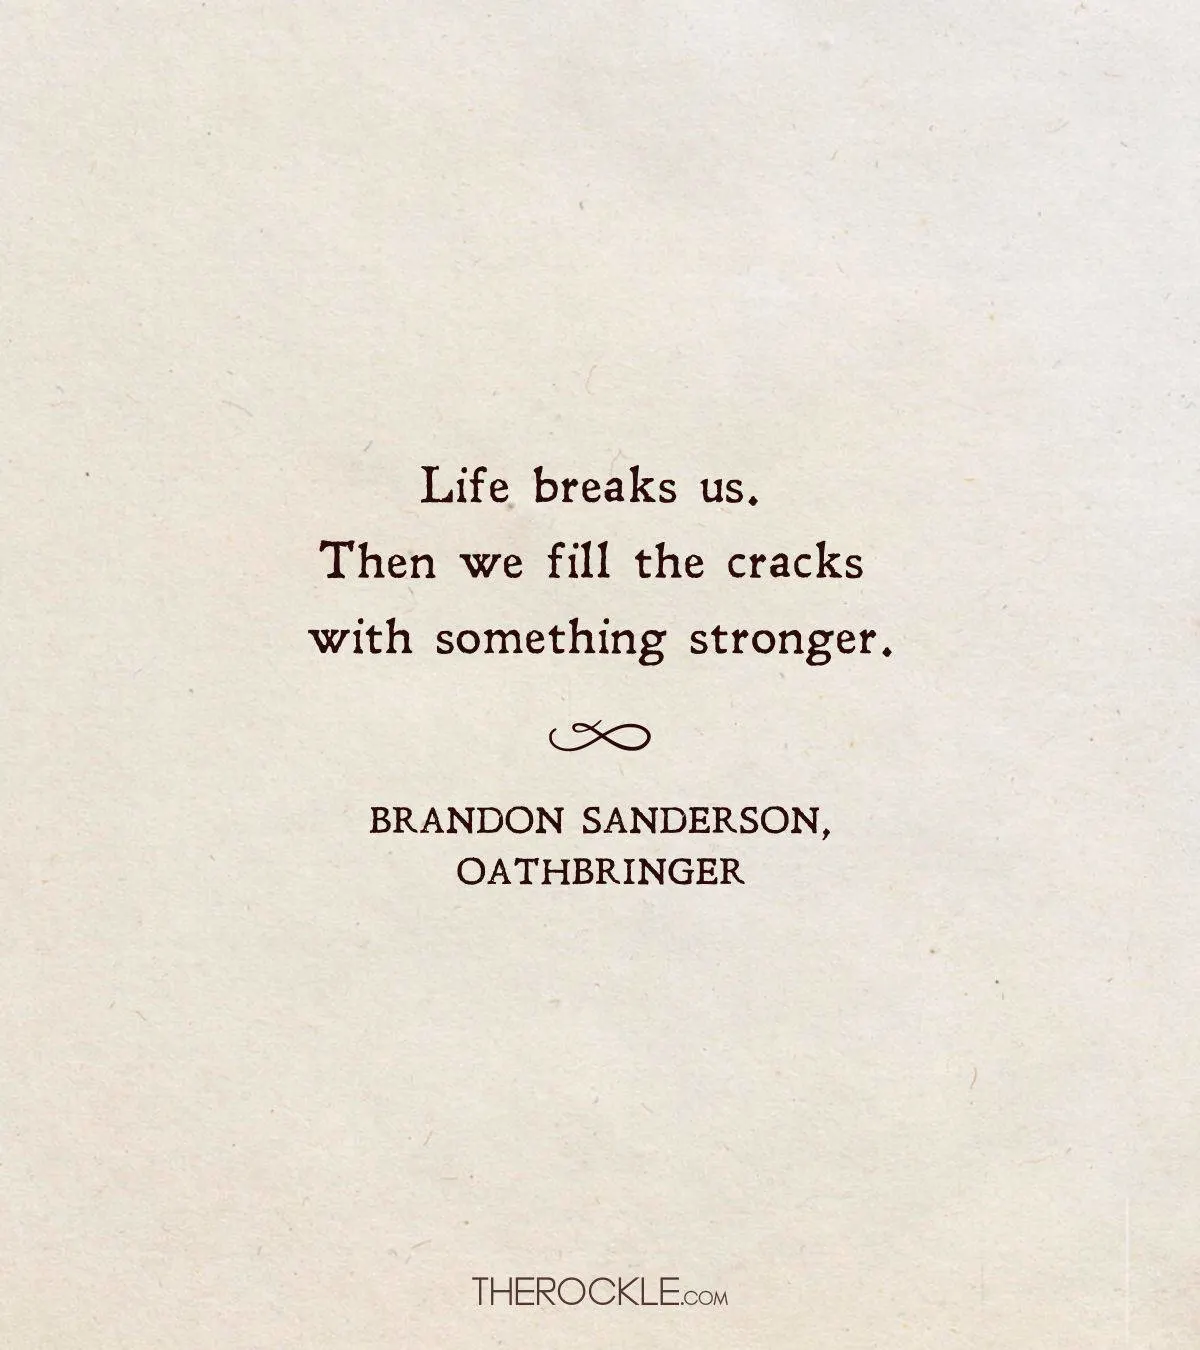 Brabdon Sanderson's quote about overcoming life's challenges